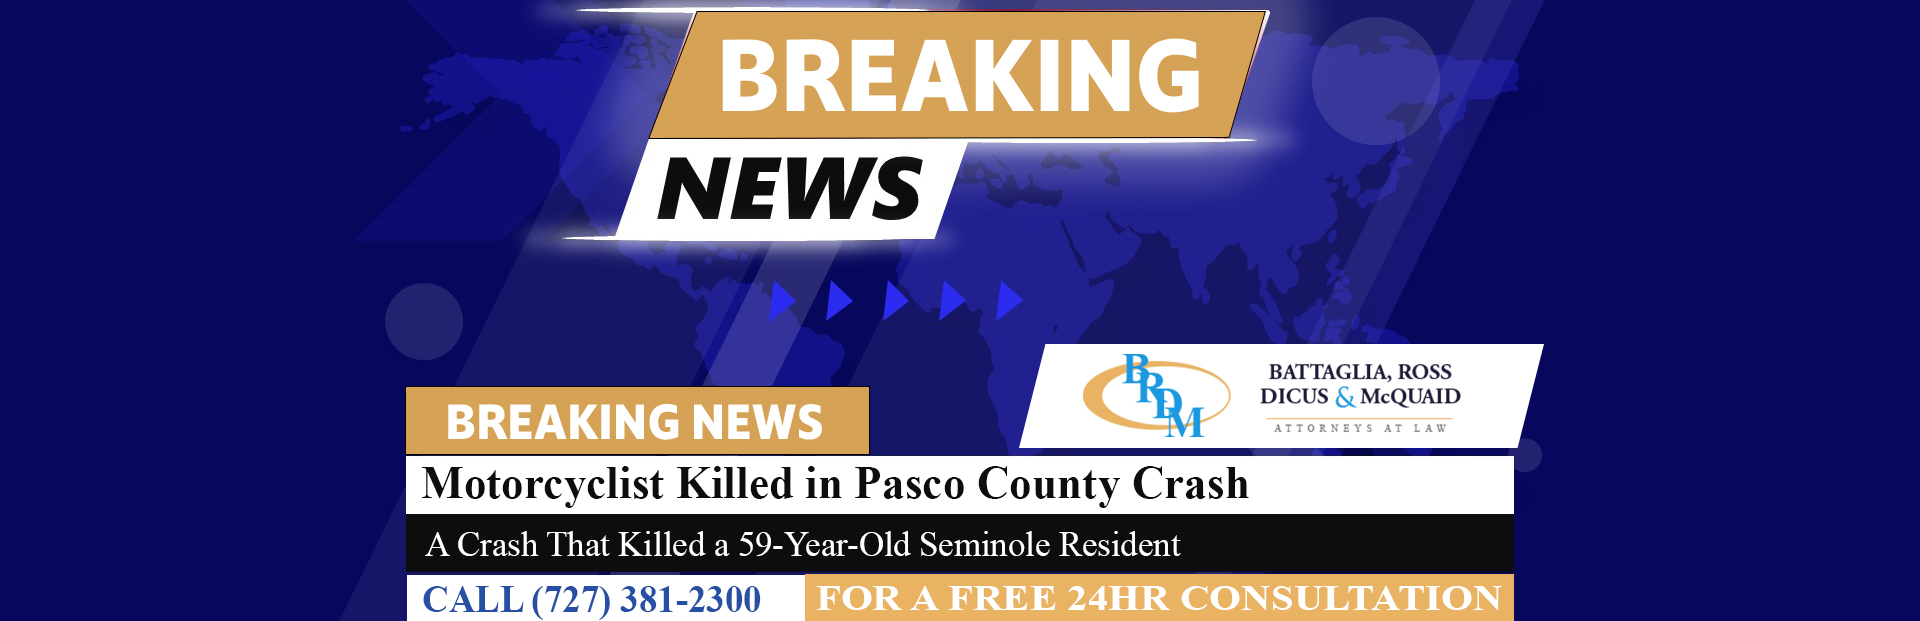 [05-14-23] Motorcyclist From Seminole Killed in Pasco County Crash